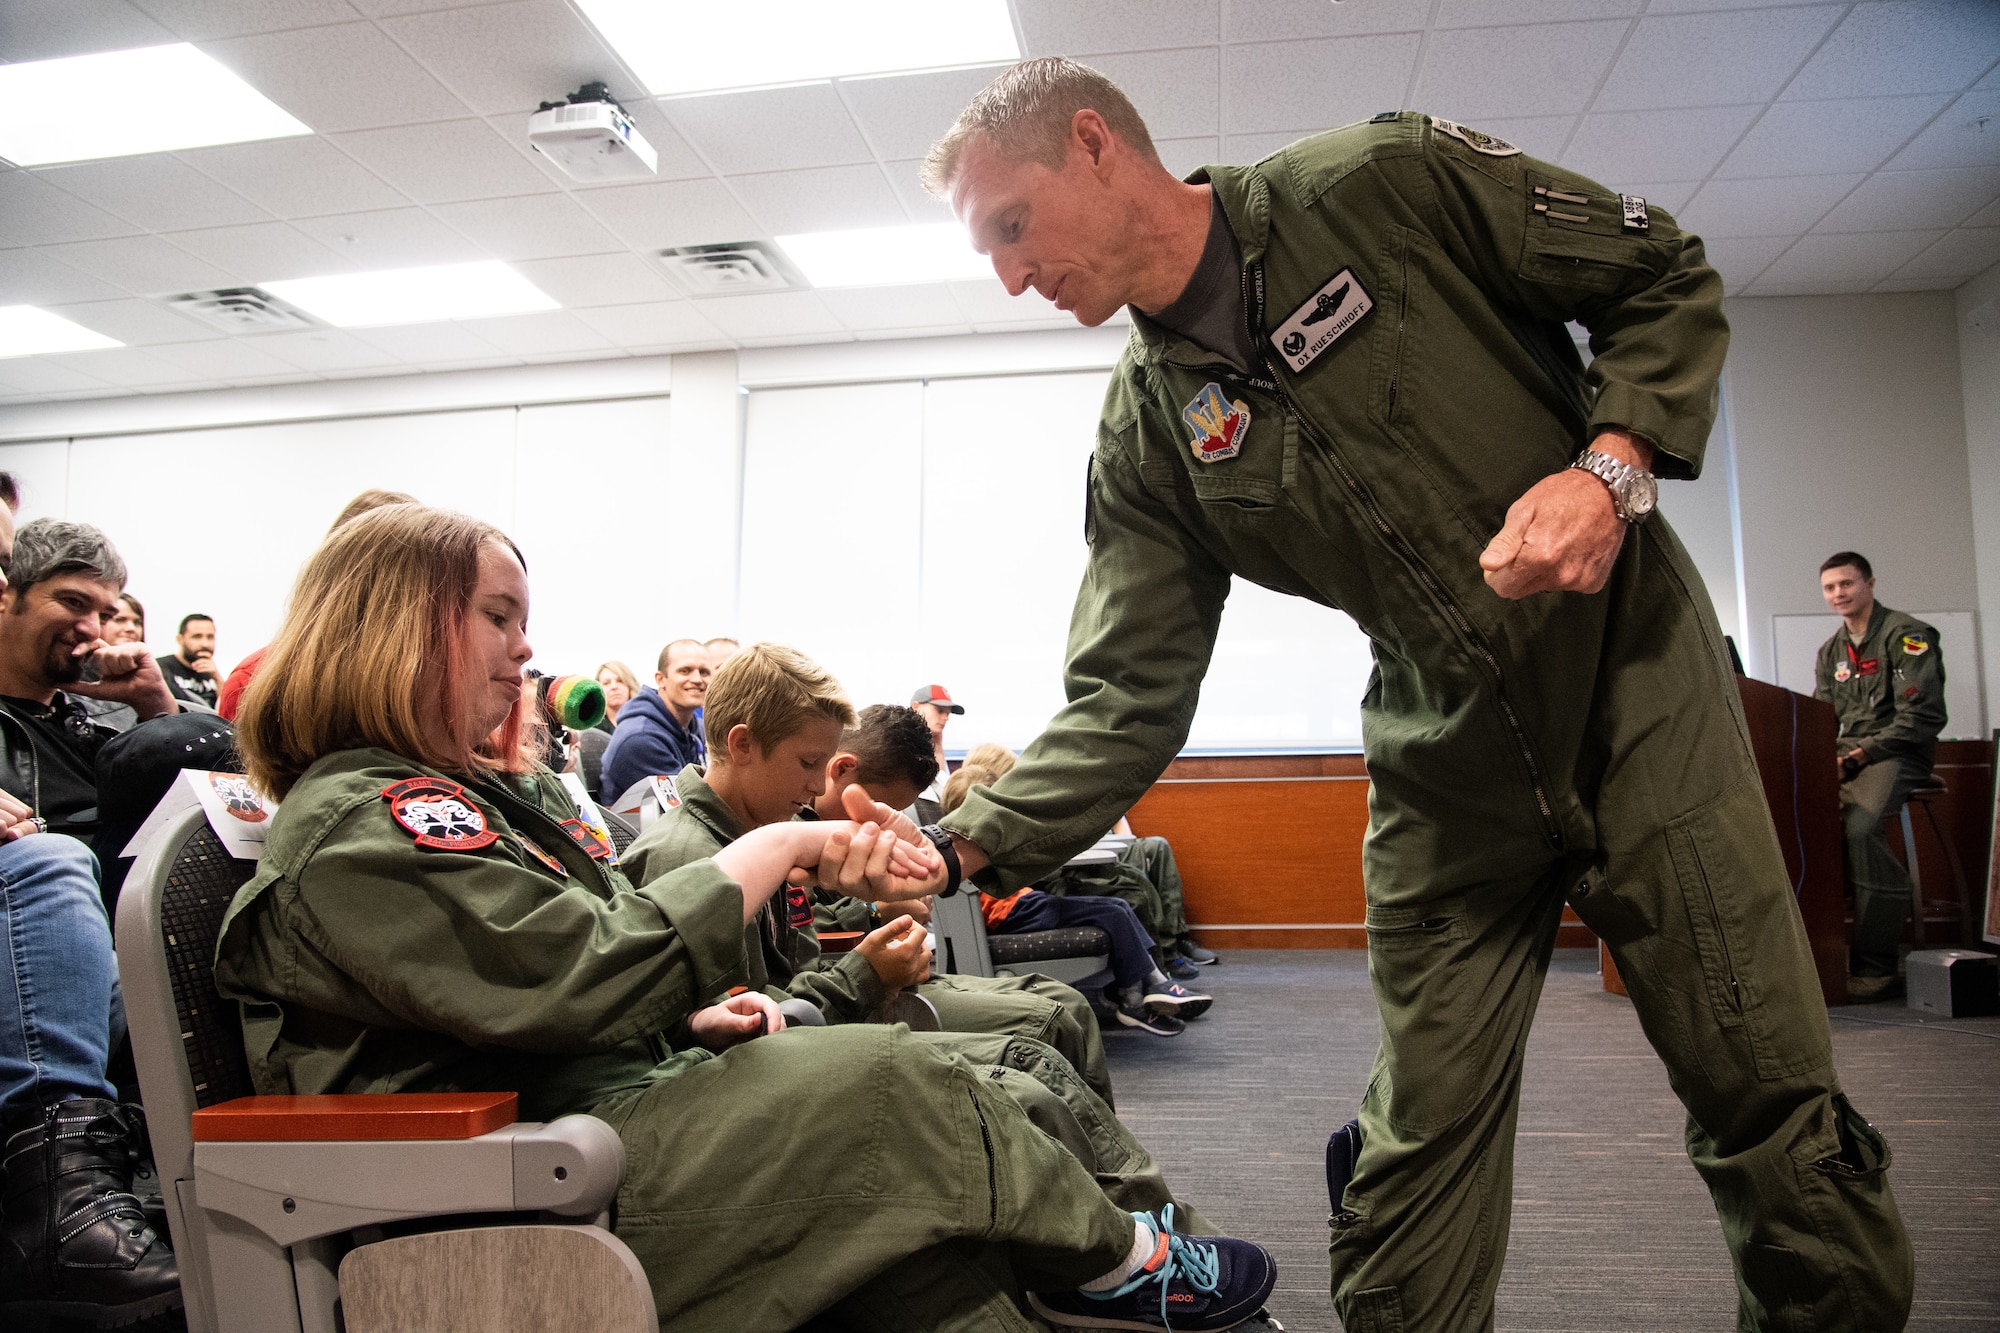 Col. Jason Rueschoff coins Michelle McConnell, May 24, 2018, at Hill Air Force Base, Utah. Eight children and their parents from the Make-A-Wish Foundation visited Hill for the "Pilot for a Day" program. The children toured the base, visited with pilots and "flew" in an F-35A cockpit trainer during the event. (U.S. Air Force photo by R. Nial Bradshaw)